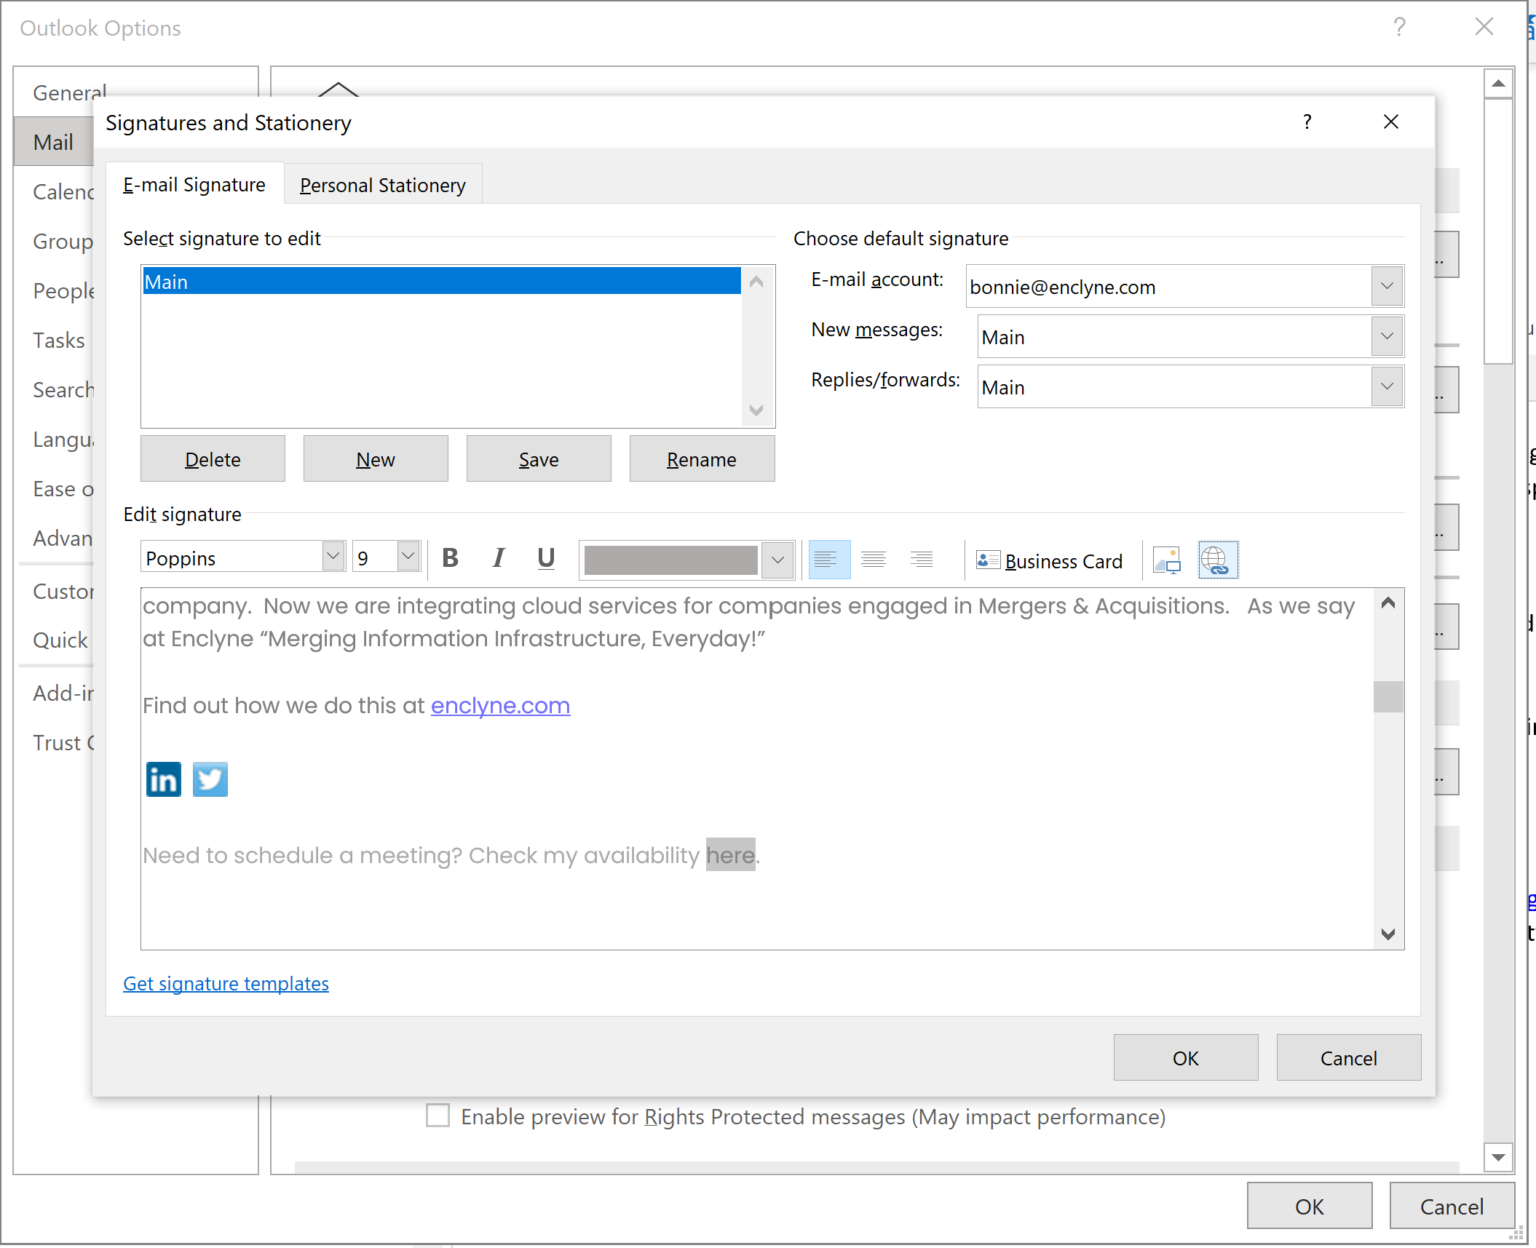 How to add signature in outlook calendar paasto